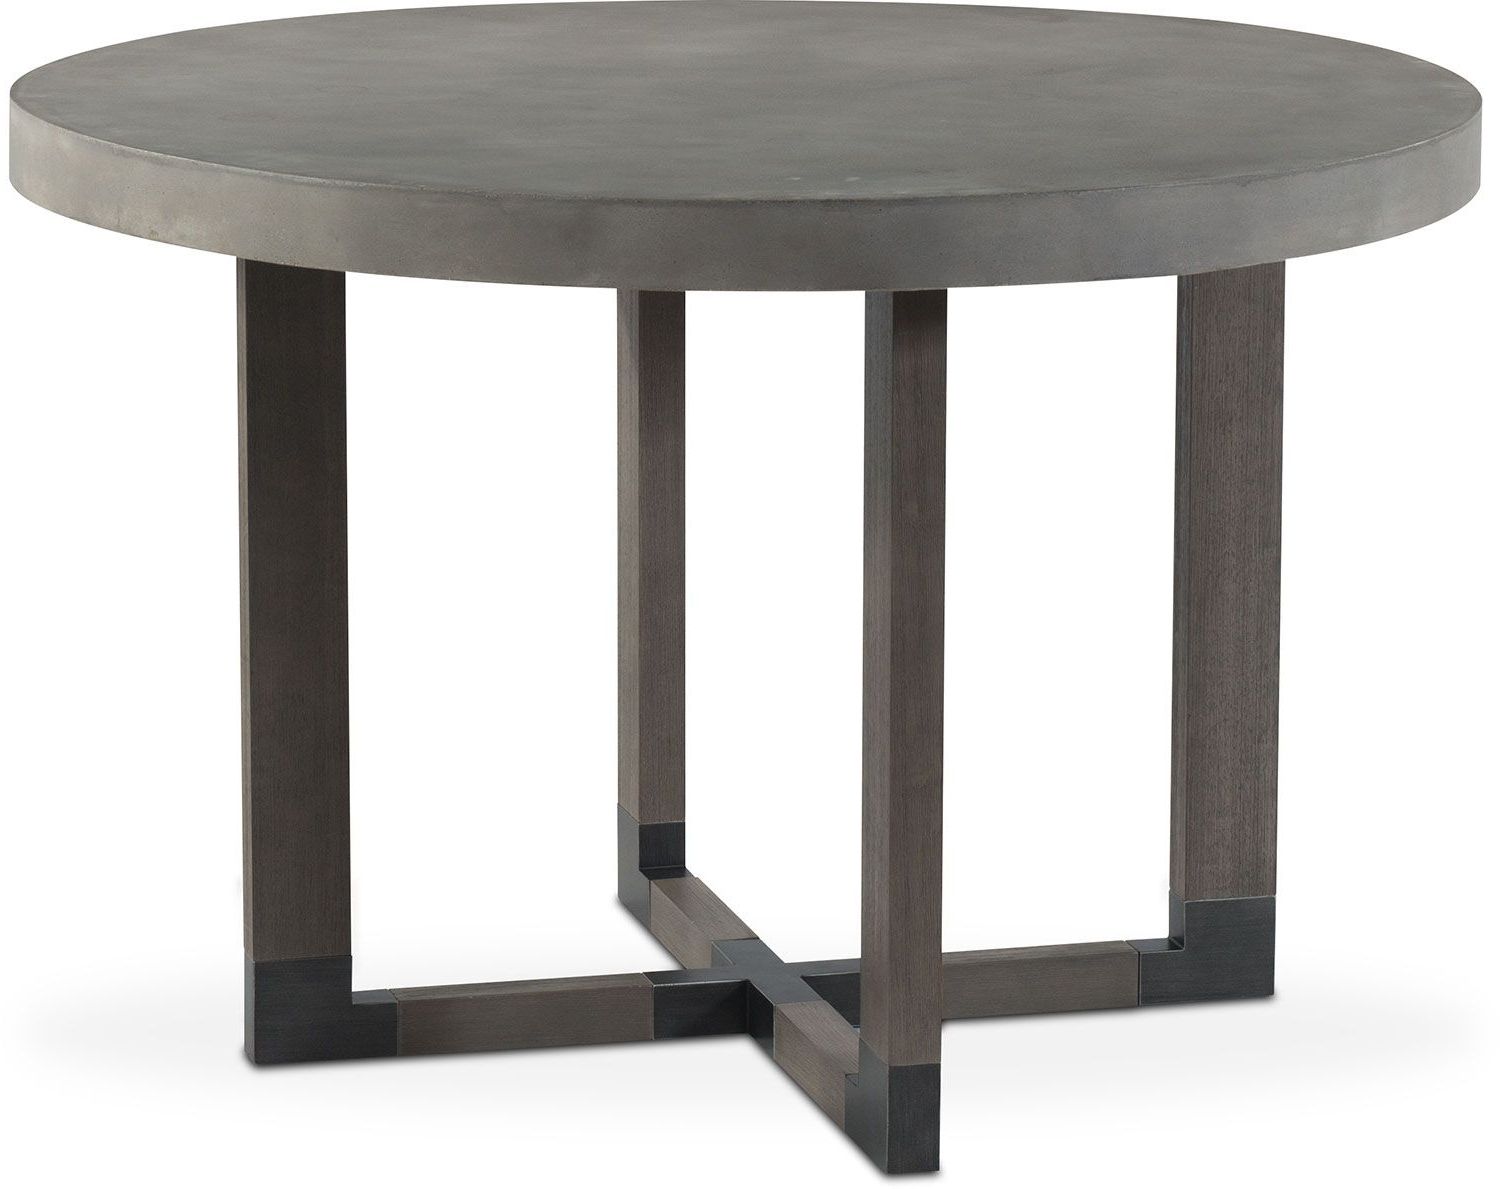 Most Up To Date James Adjustables Height Extending Dining Tables Intended For Malibu Round Counter Height Concrete Top Table – Gray (View 5 of 25)